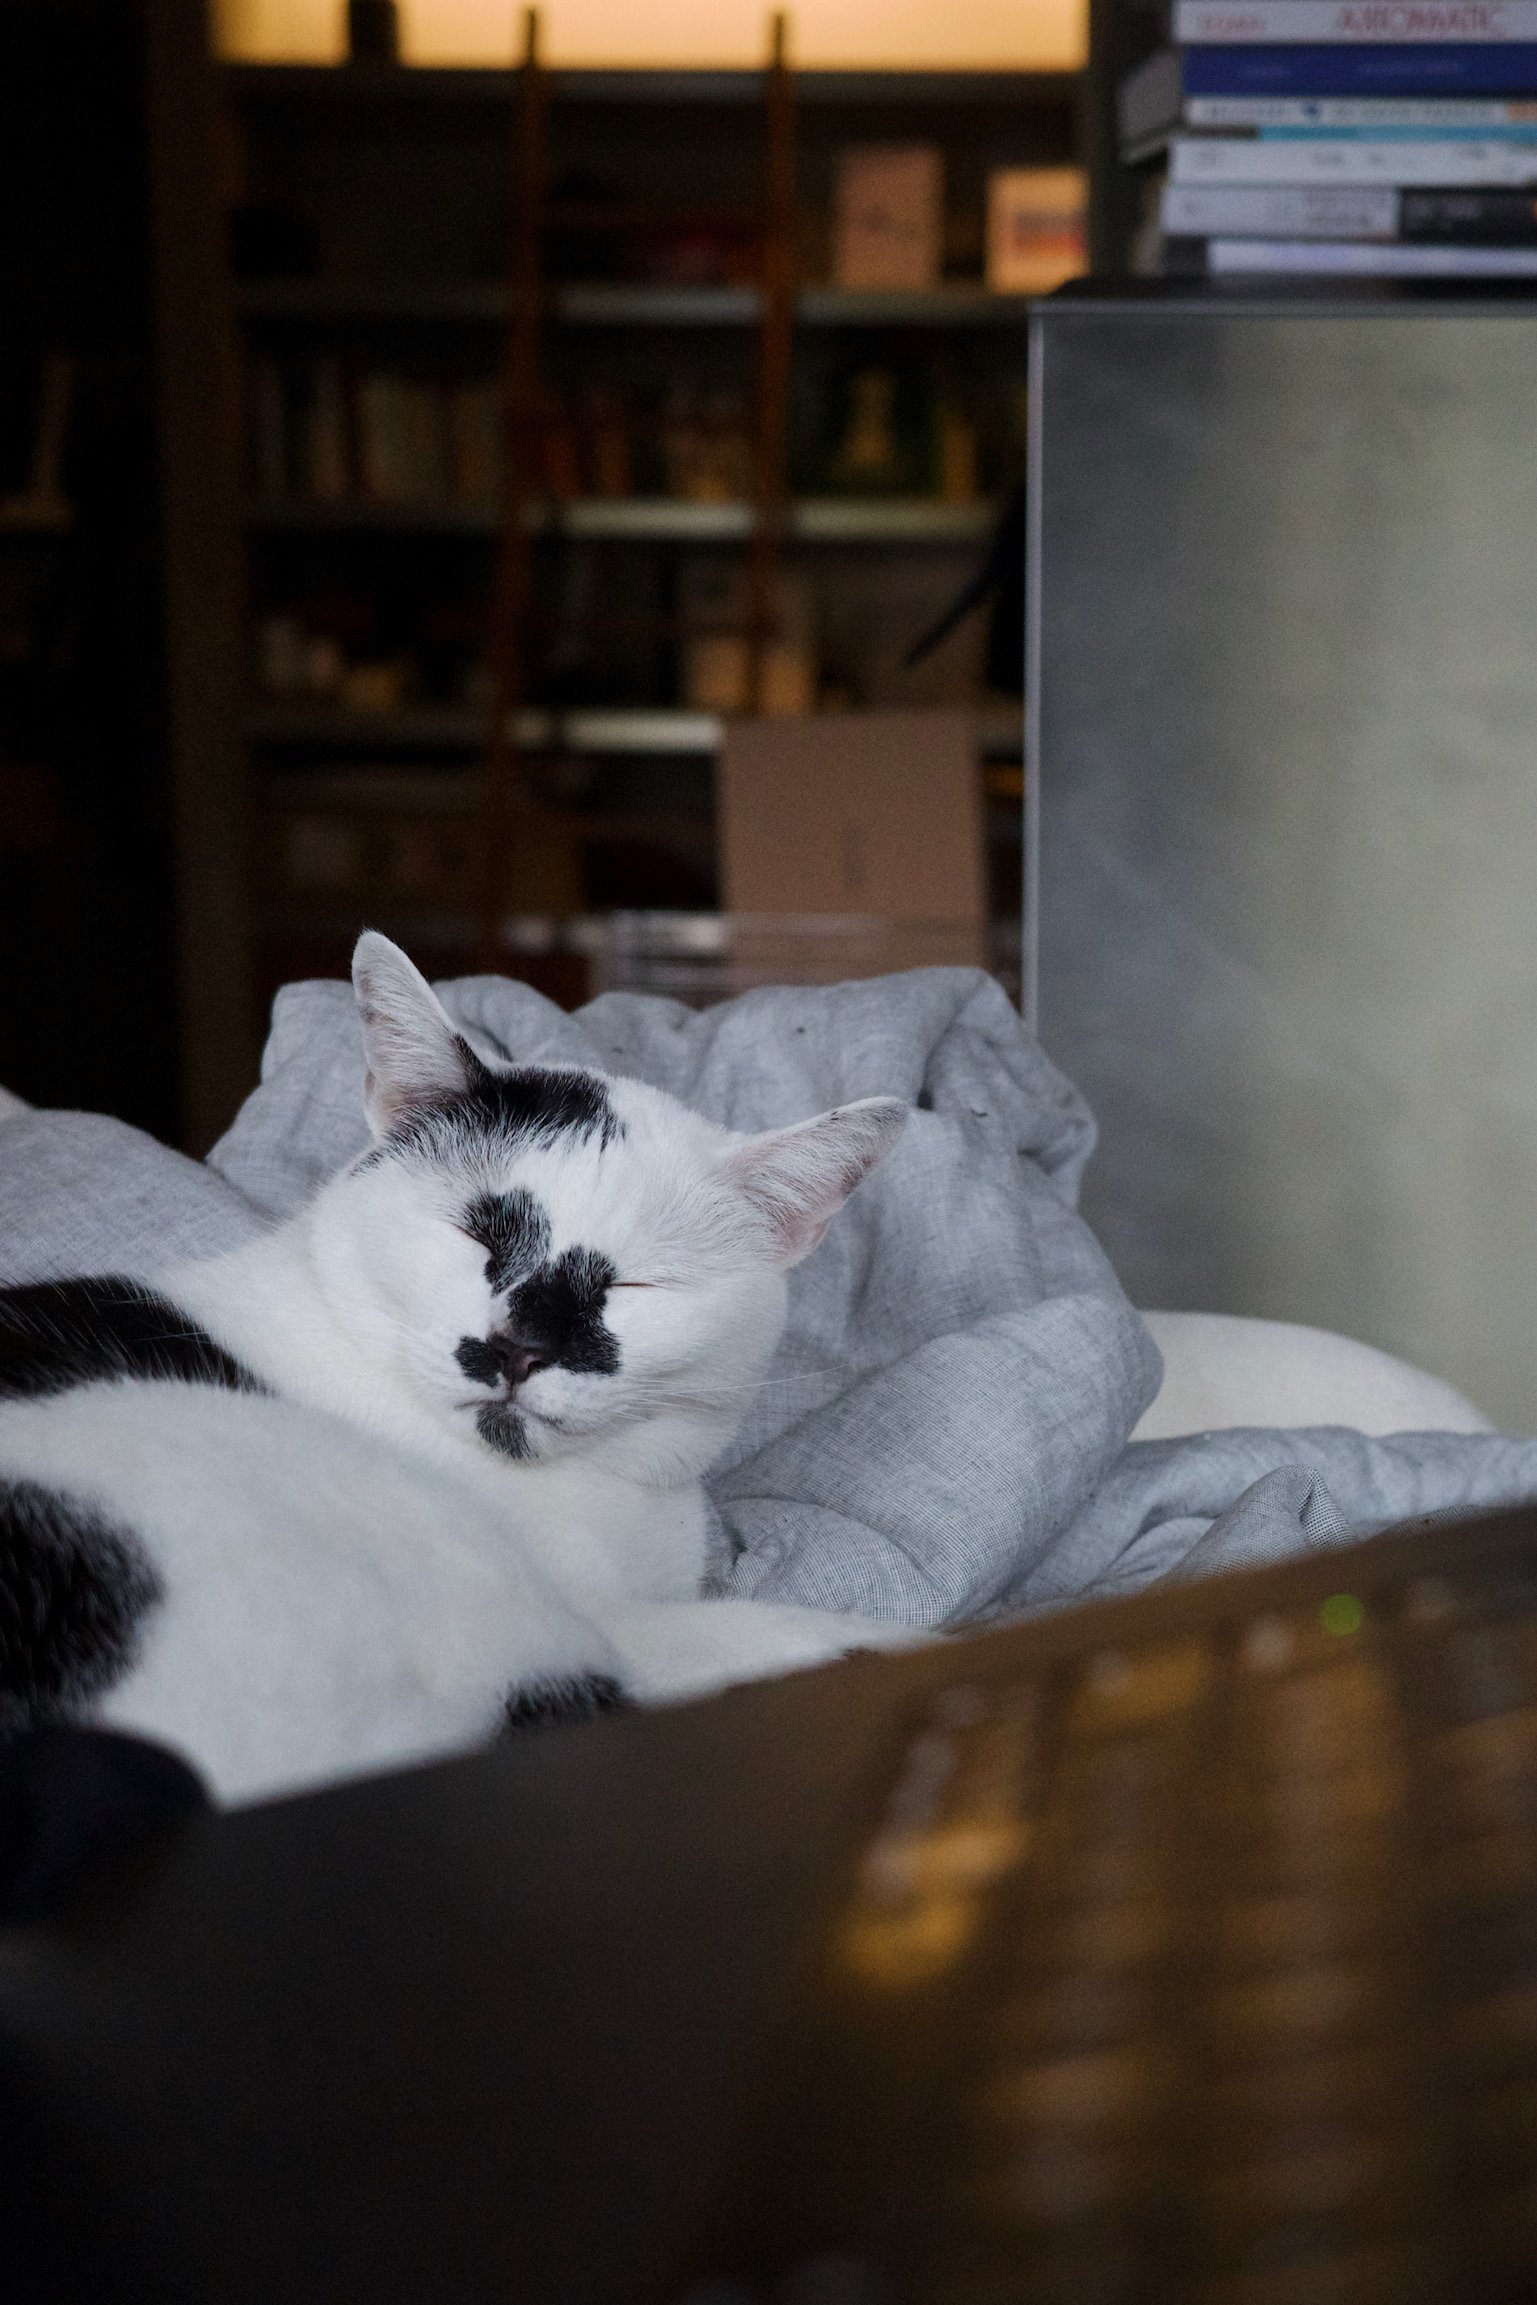 A cat squinting on a couch with a blurred laptop in the foreground.